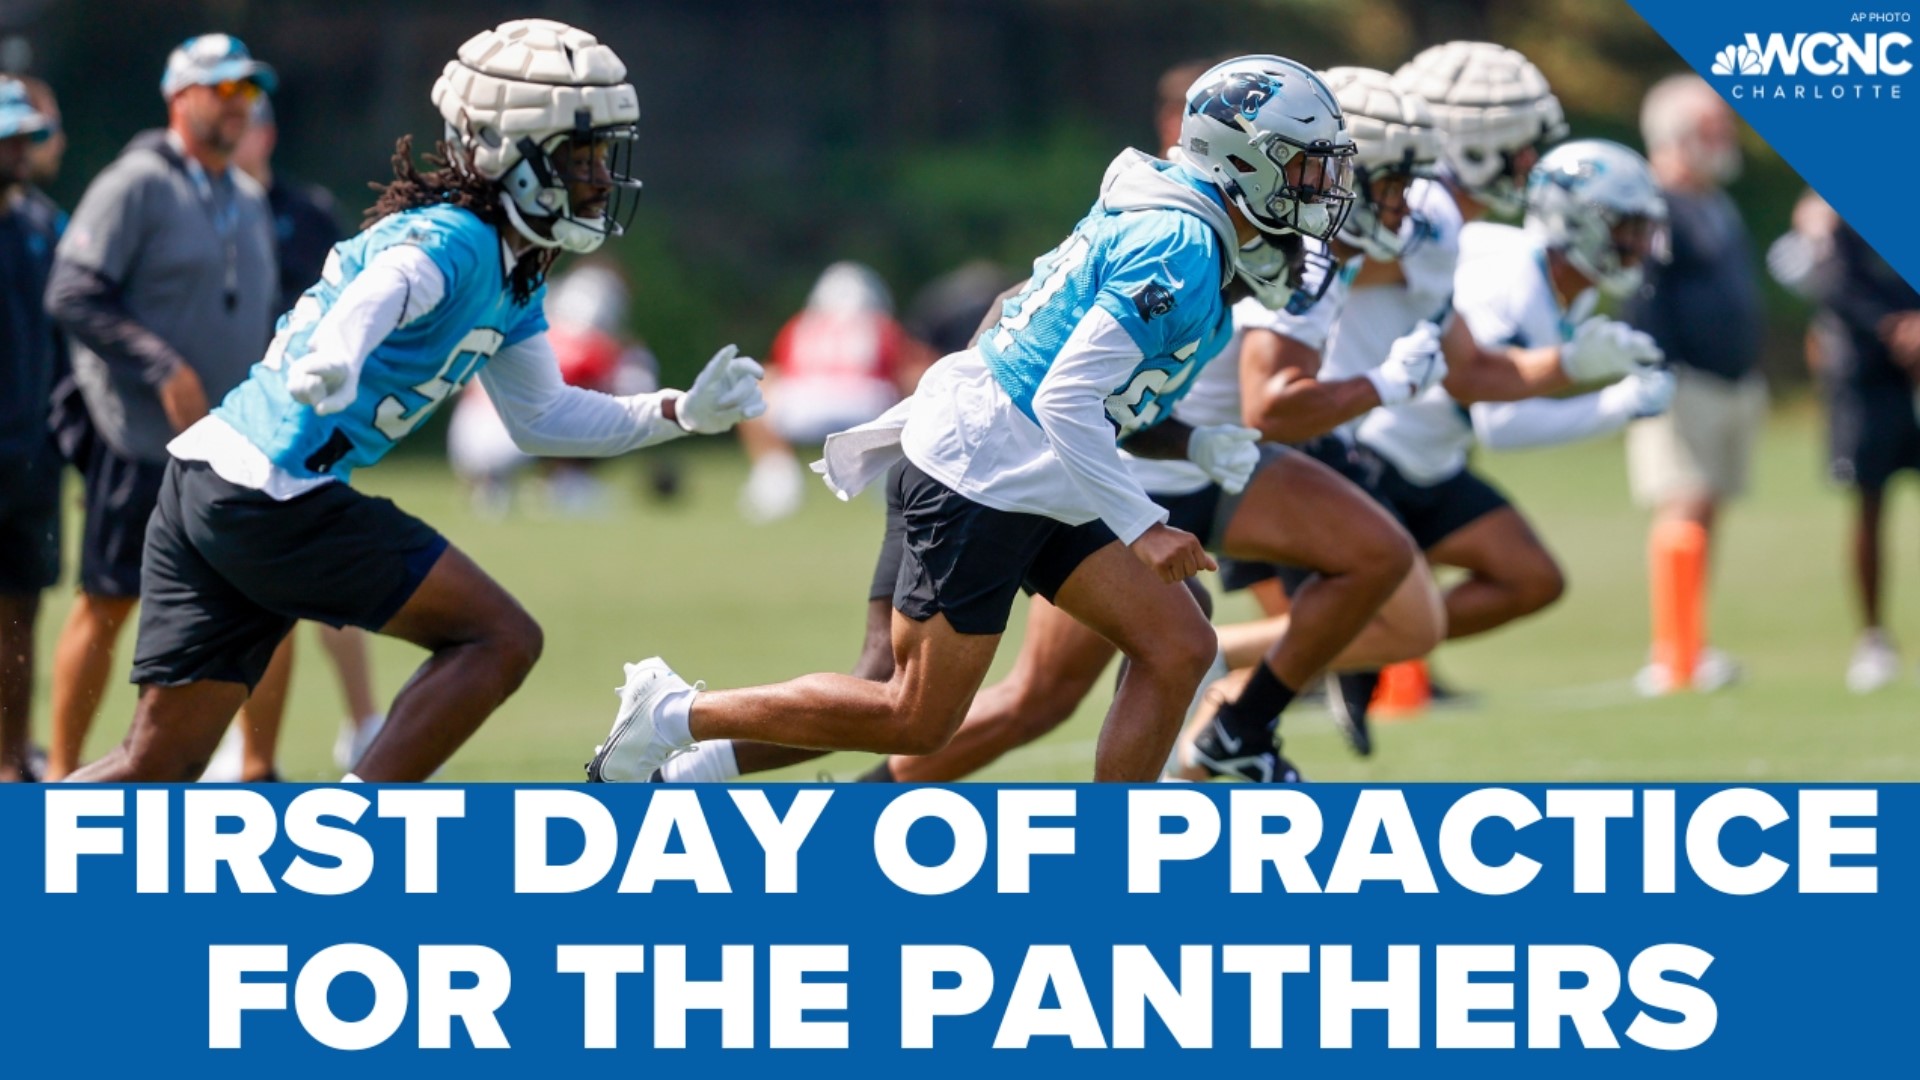 It's the first day of practice for the Panthers.